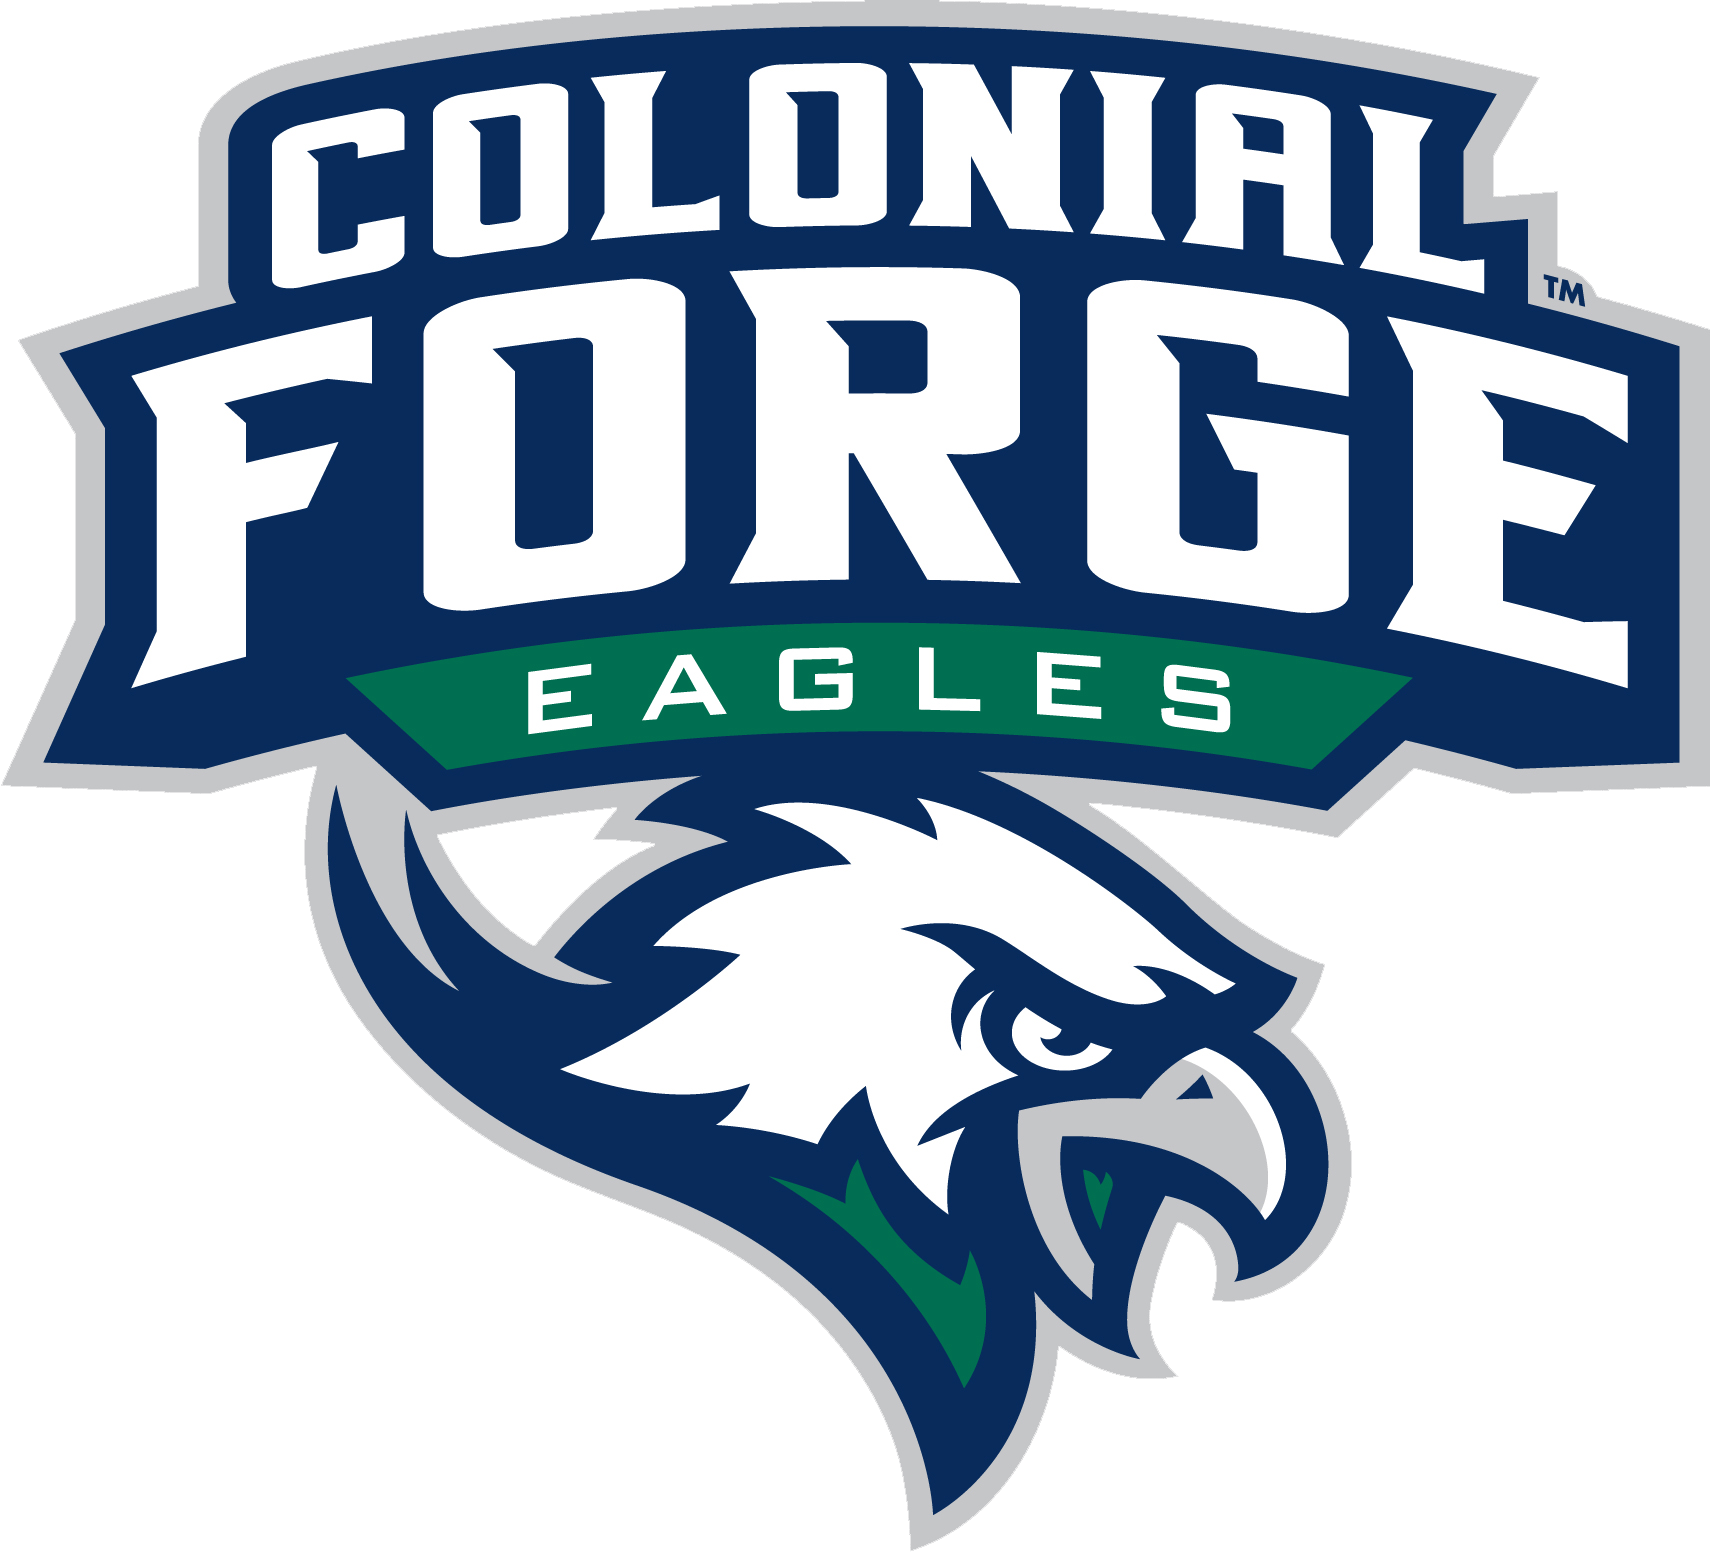 Colonial Forge Spirit Wear